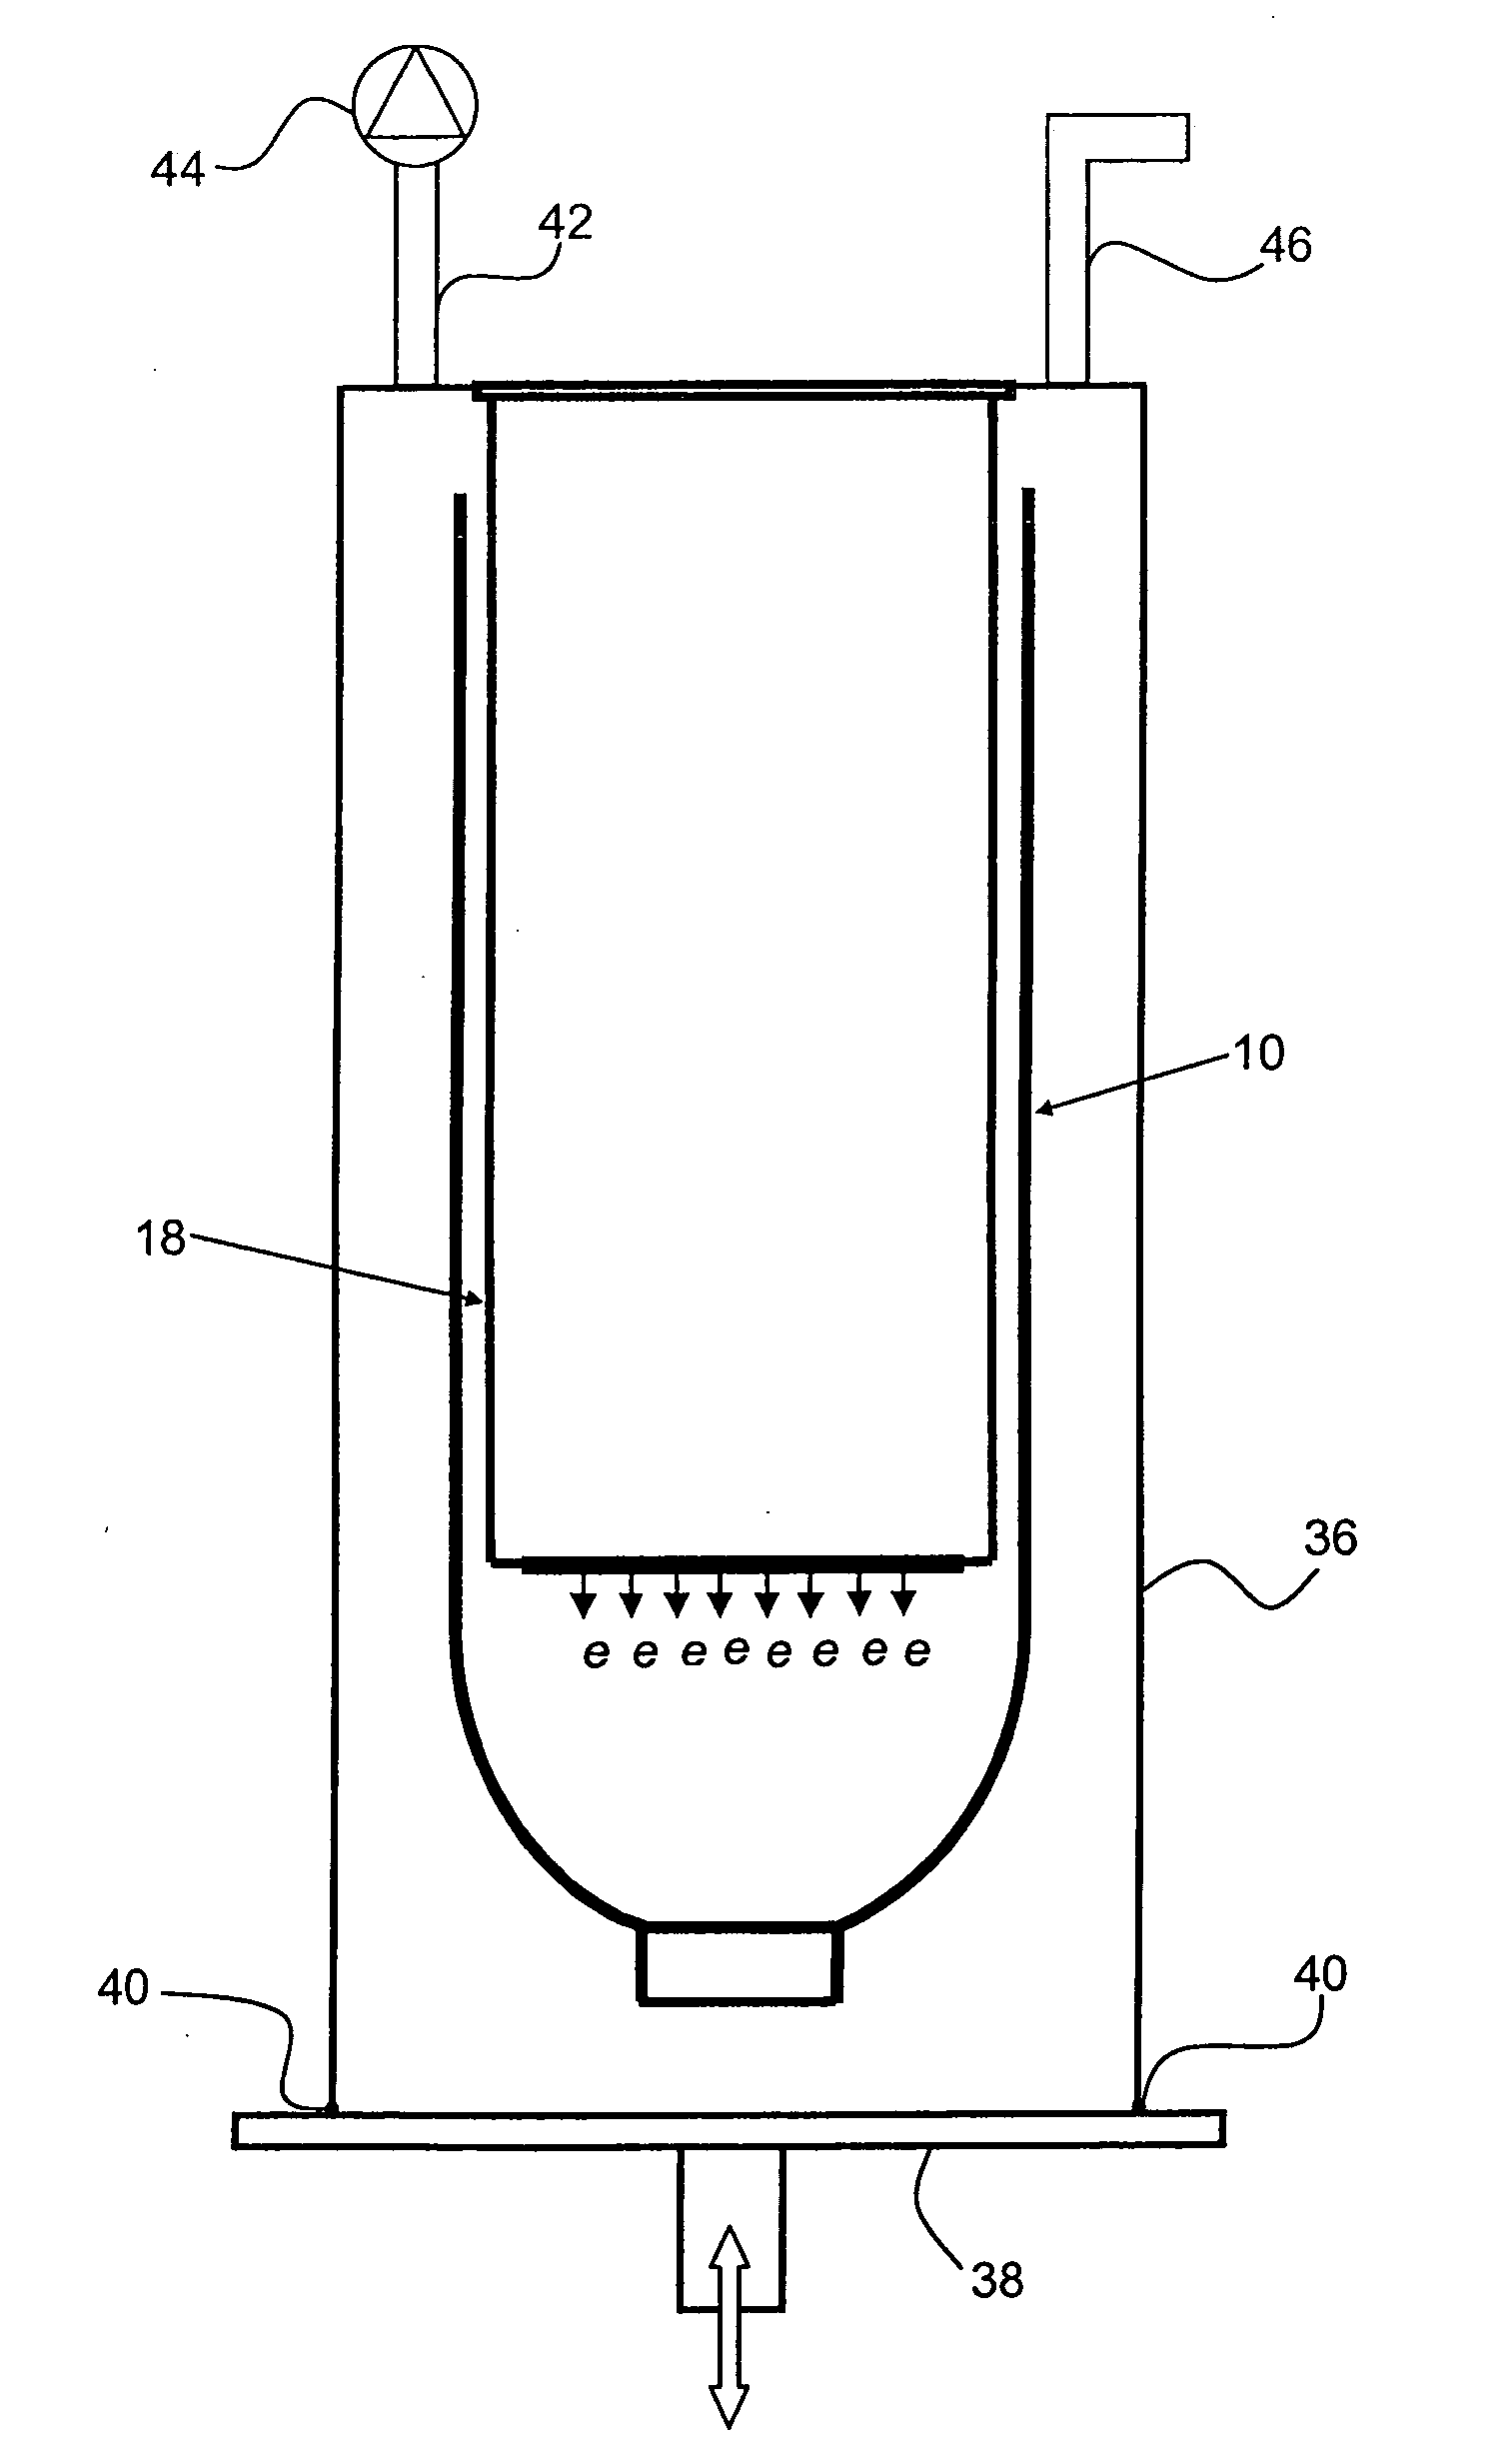 Method for irradiating objects